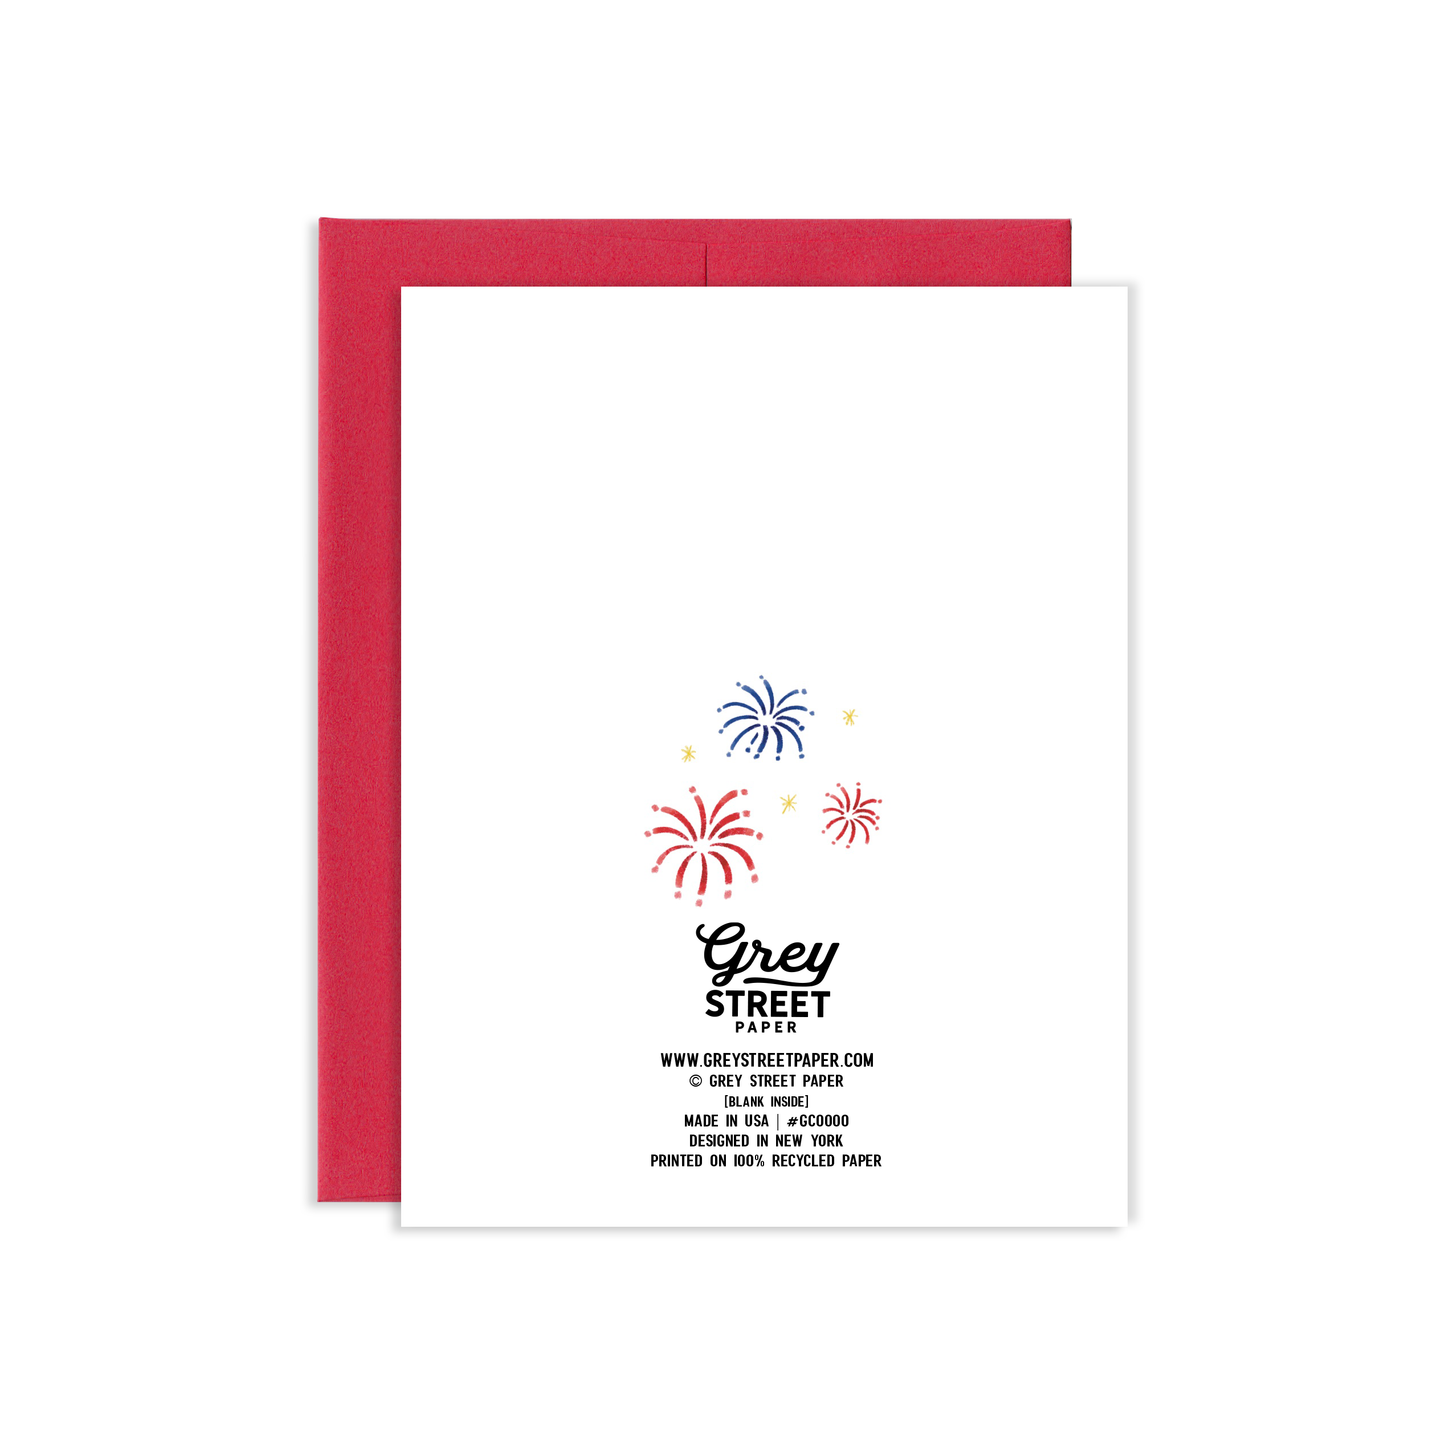 Lady Liberty Chipmunk Independence Day Greeting Card